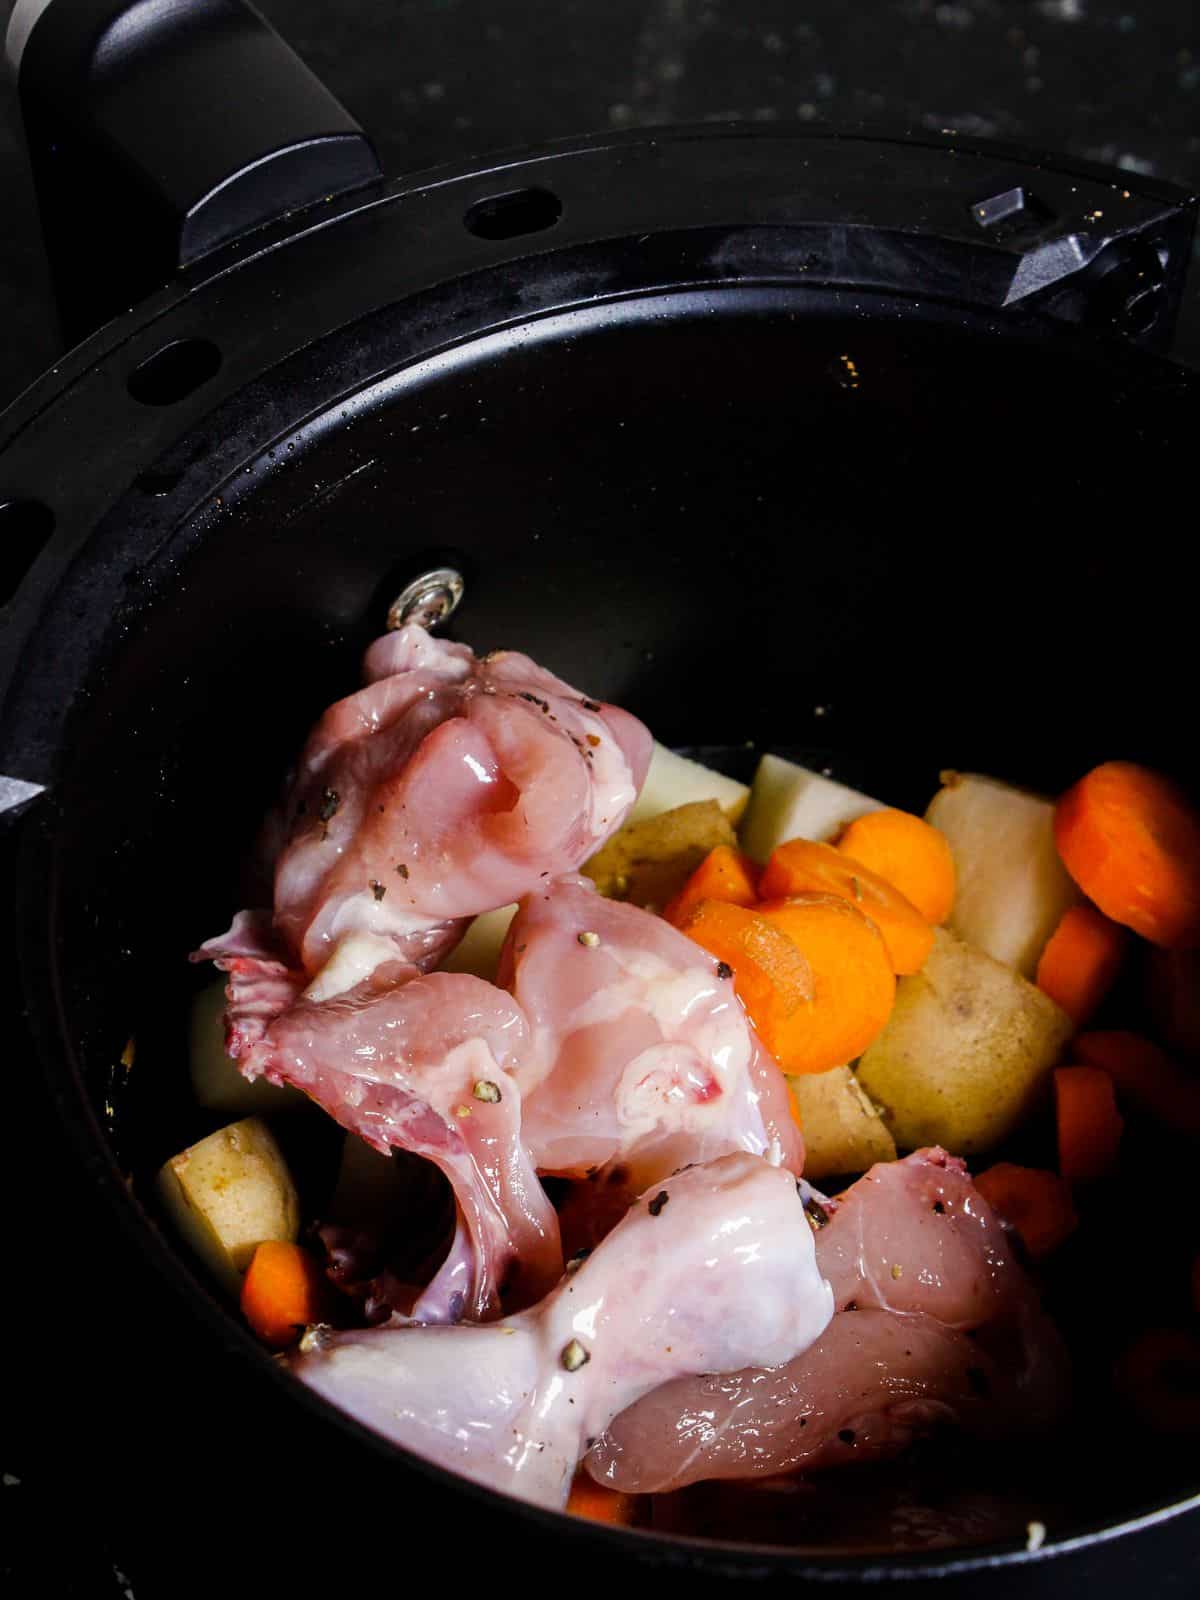 Add marinated chicken along with cubed vegetables into the instant pot and start cooking 